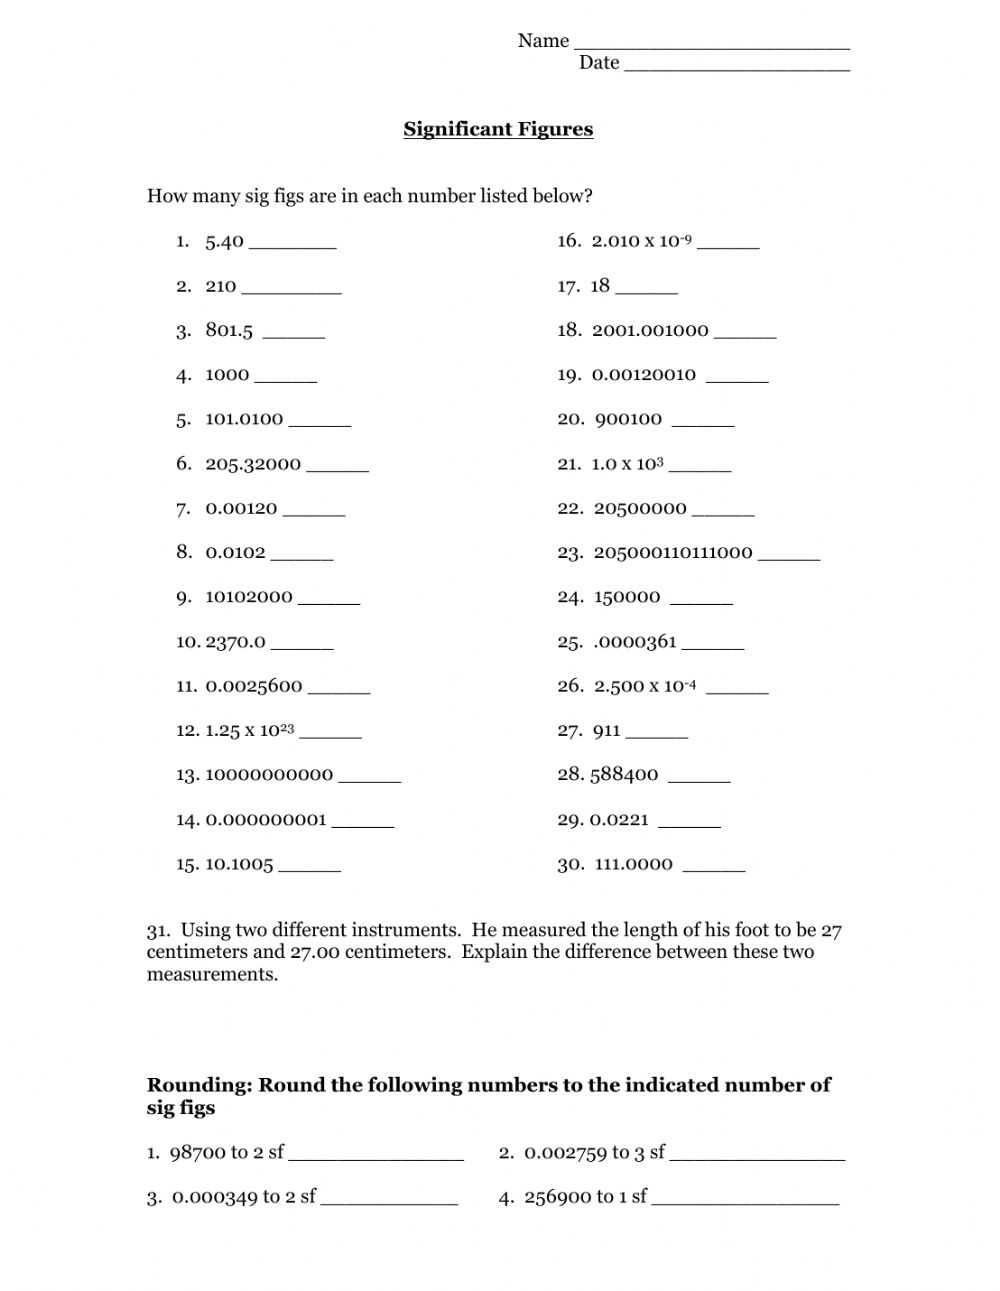 Significant Figures With Math Review Worksheet Math Worksheet Answers